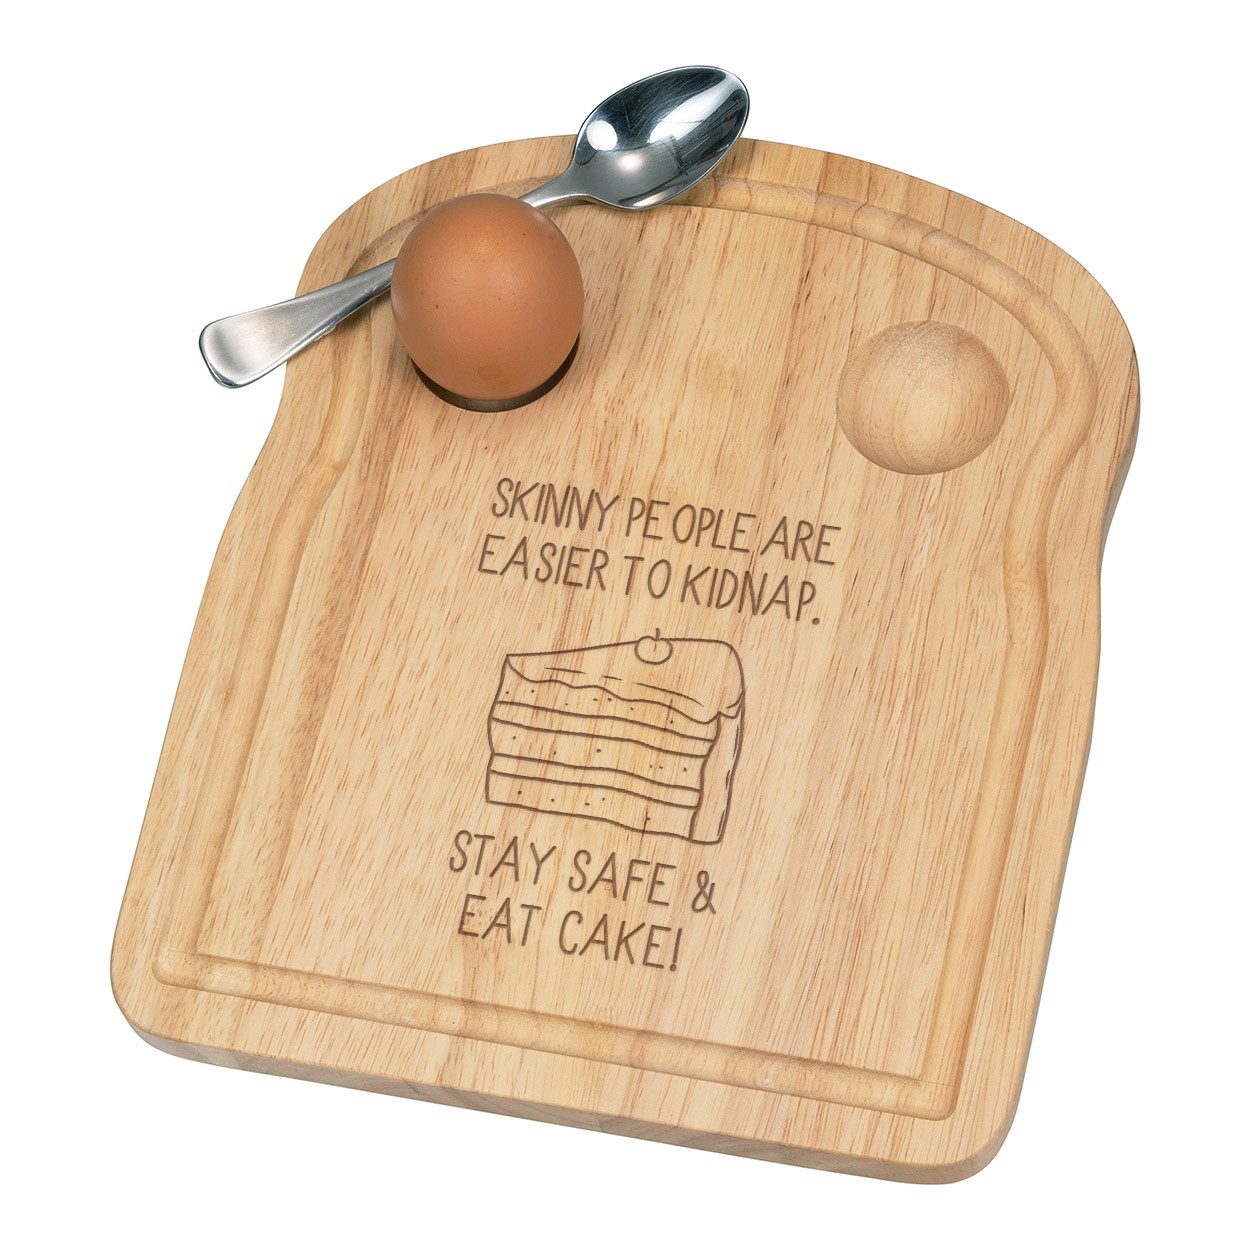 Skinny People Are Easier To Kidnap Stay Safe & Eat Cake Breakfast Dippy Egg Cup Board Wooden